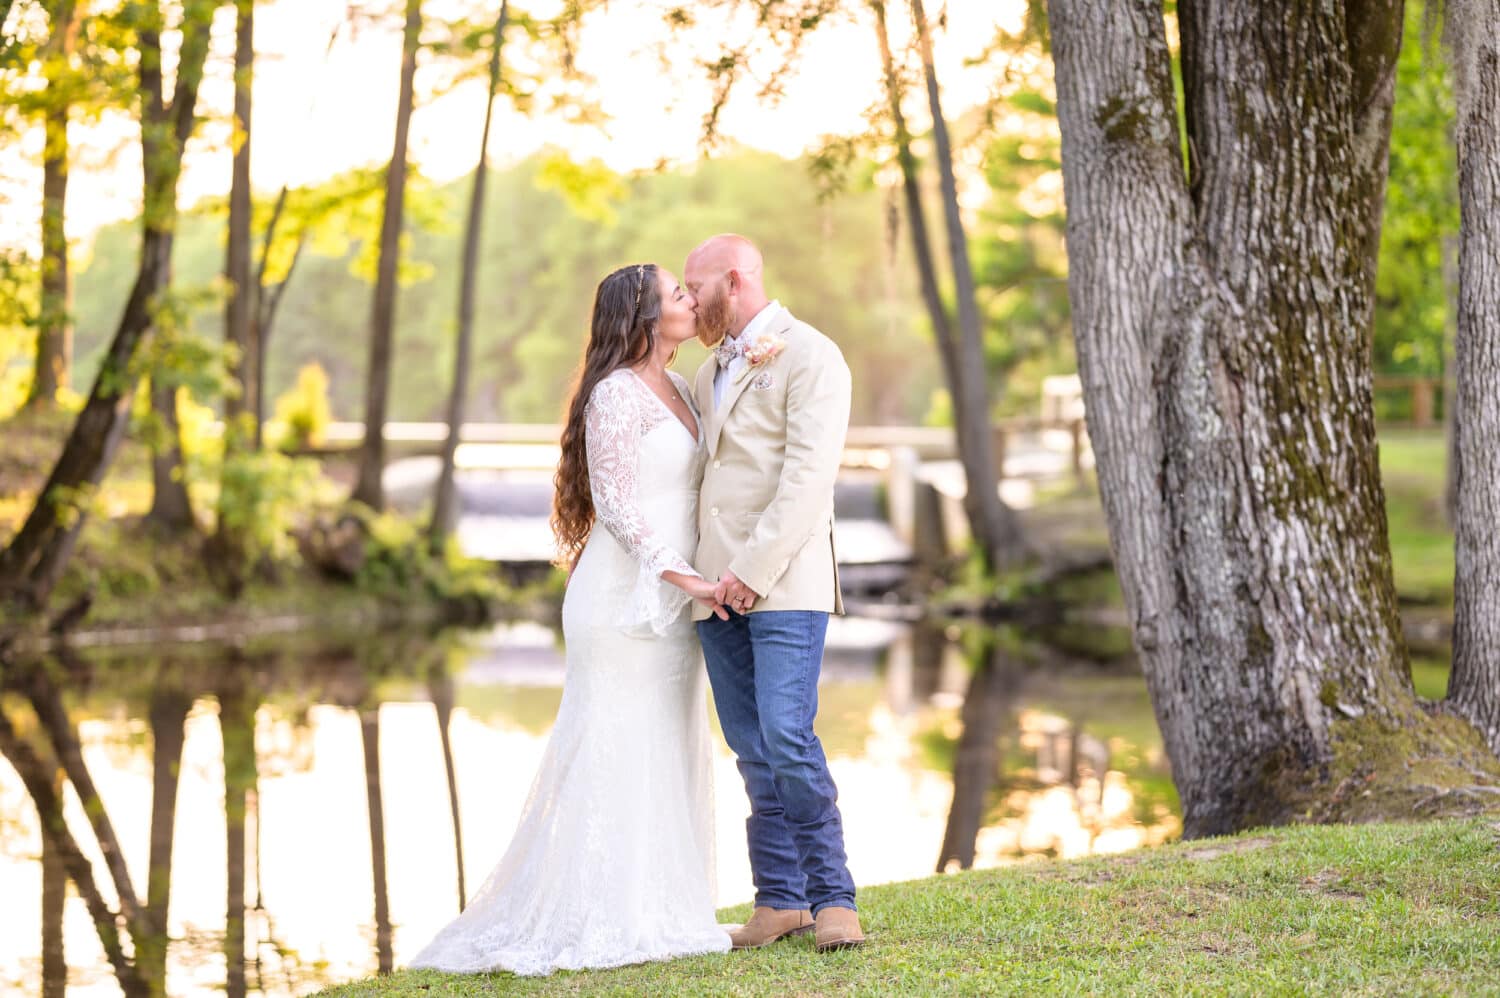 Kiss by the lake - The Spillway - Whiteville